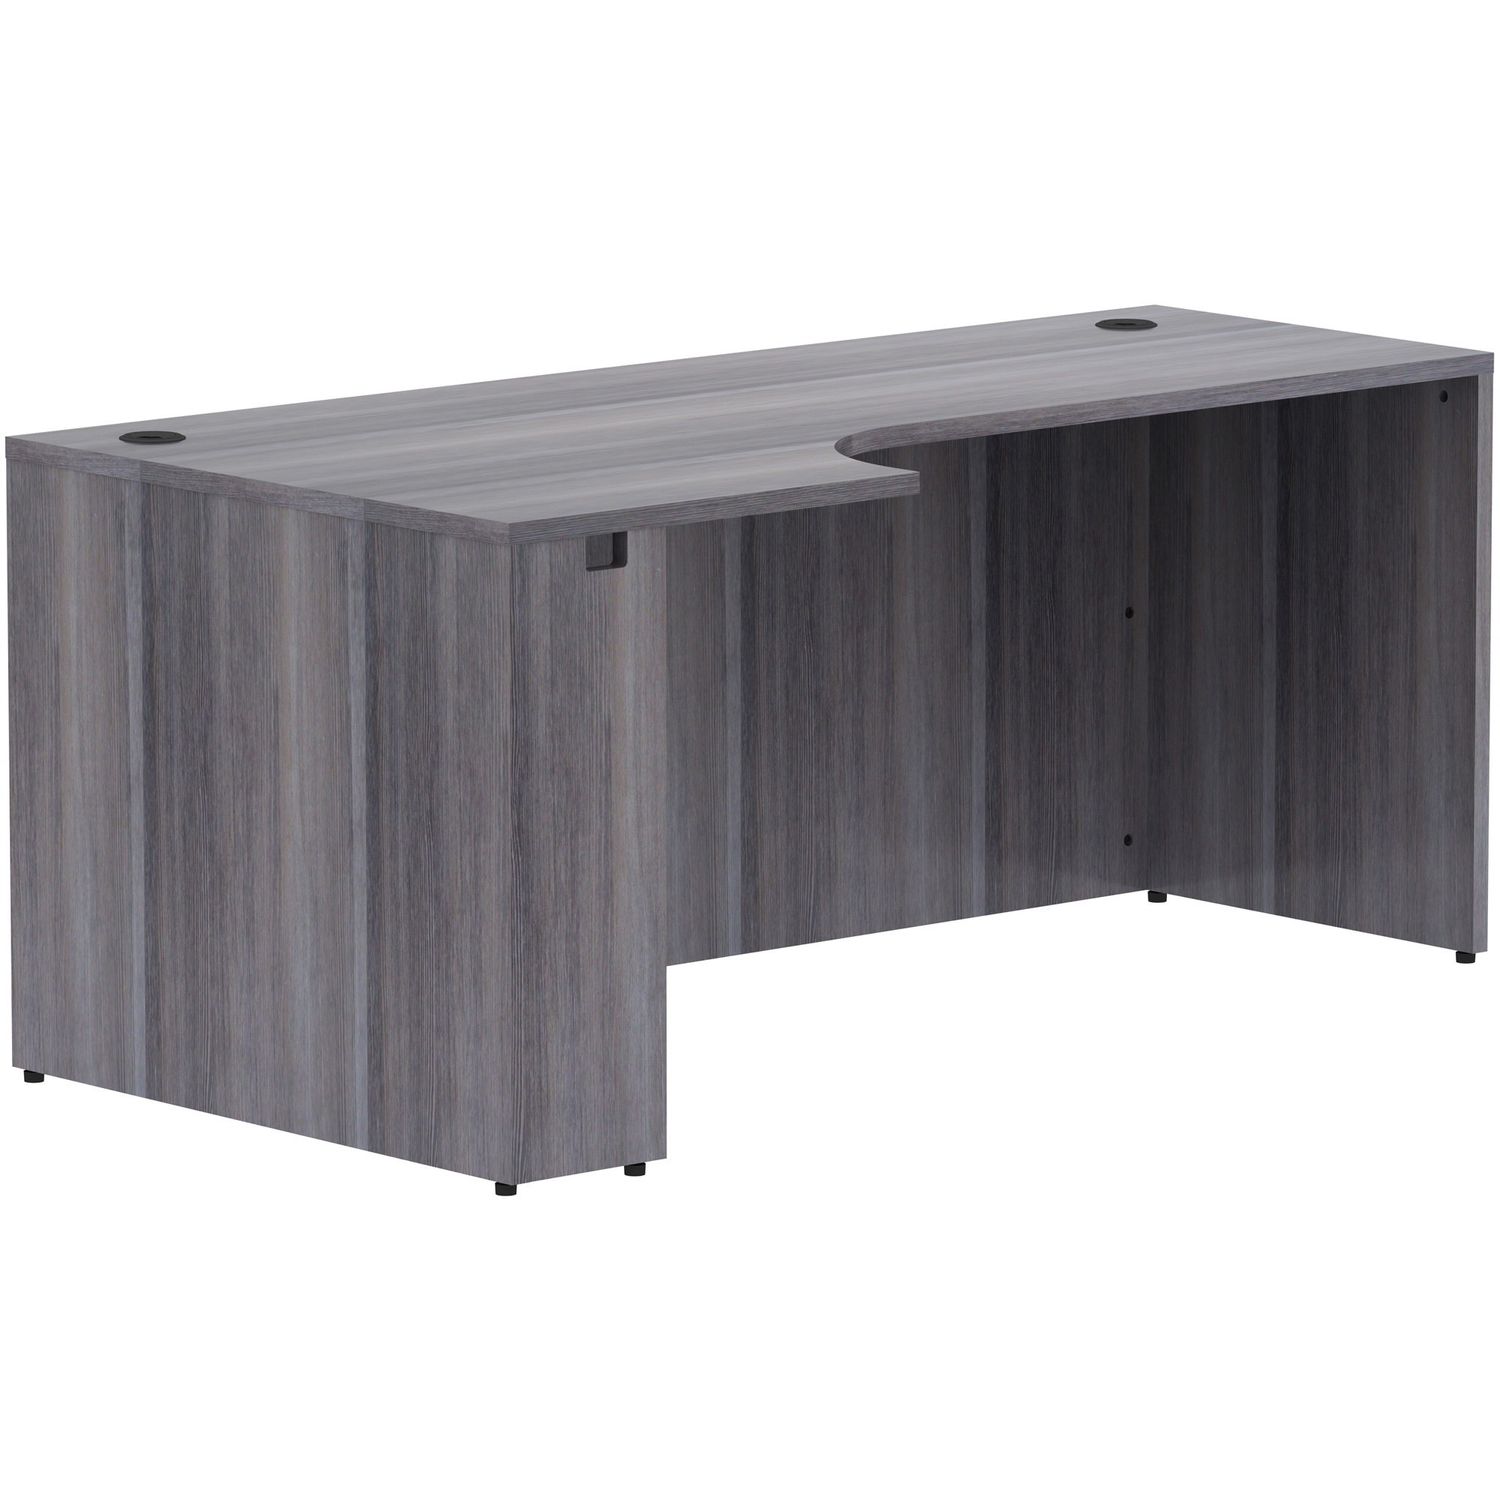 Weathered Charcoal Laminate Desking 72" x 36" x 24"29.5" Credenza, 1" Top, Material: Polyvinyl Chloride (PVC) Edge, Finish: Weathered Charcoal Laminate